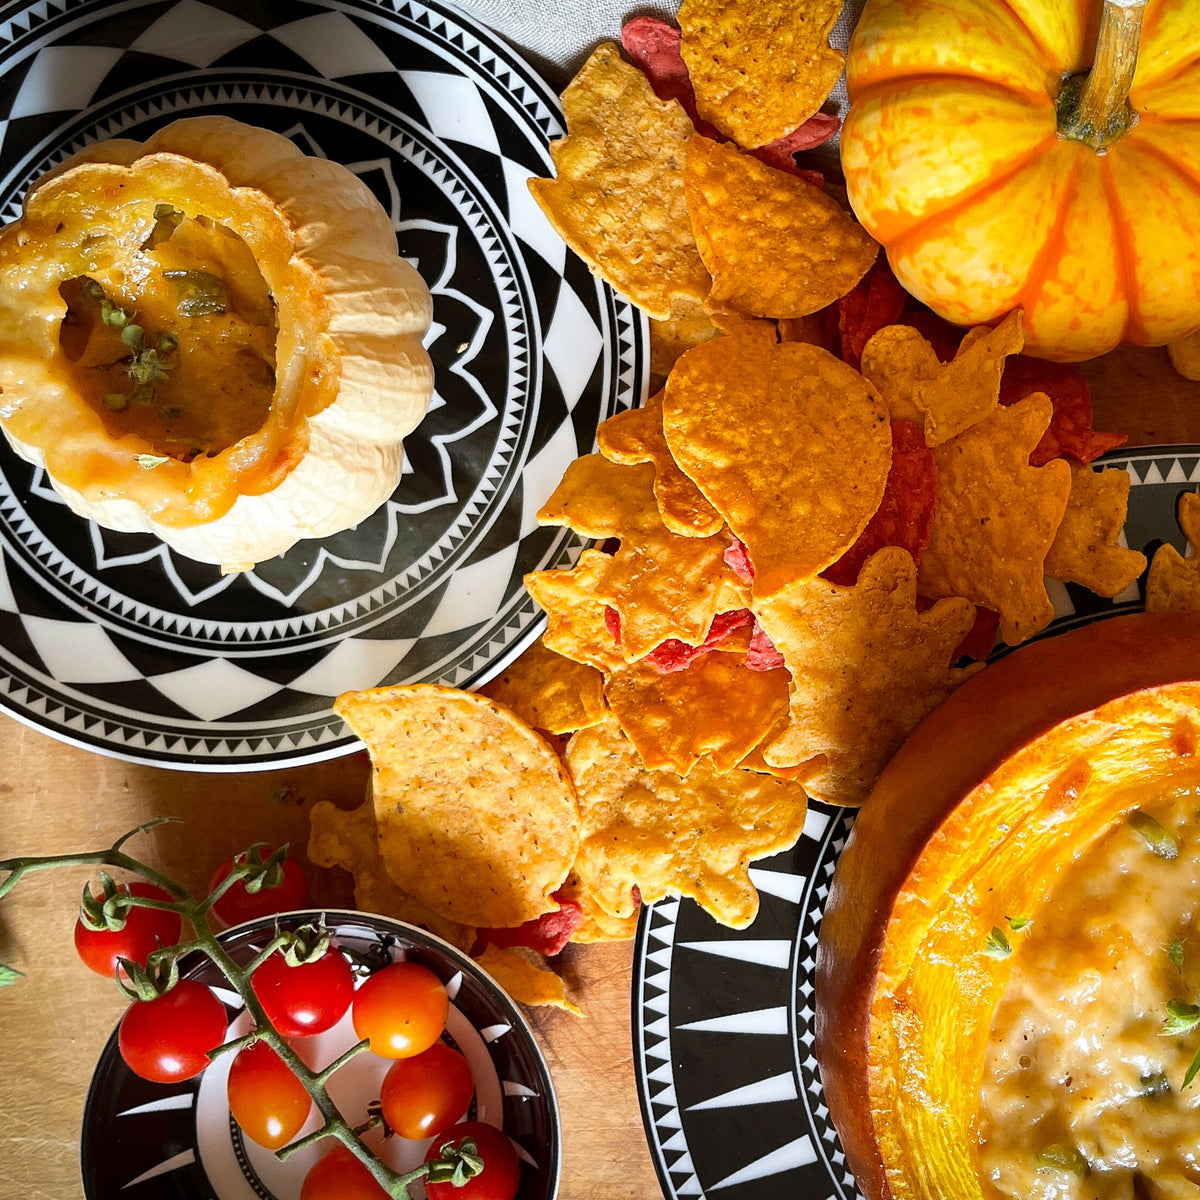 Festive fall-themed table with pumpkin-shaped bowls containing dip, surrounded by leaf-shaped chips, tomatoes, and a pumpkin for decoration, featuring Fez Small Plates by Caskata Artisanal Home that complement the autumn ambiance.